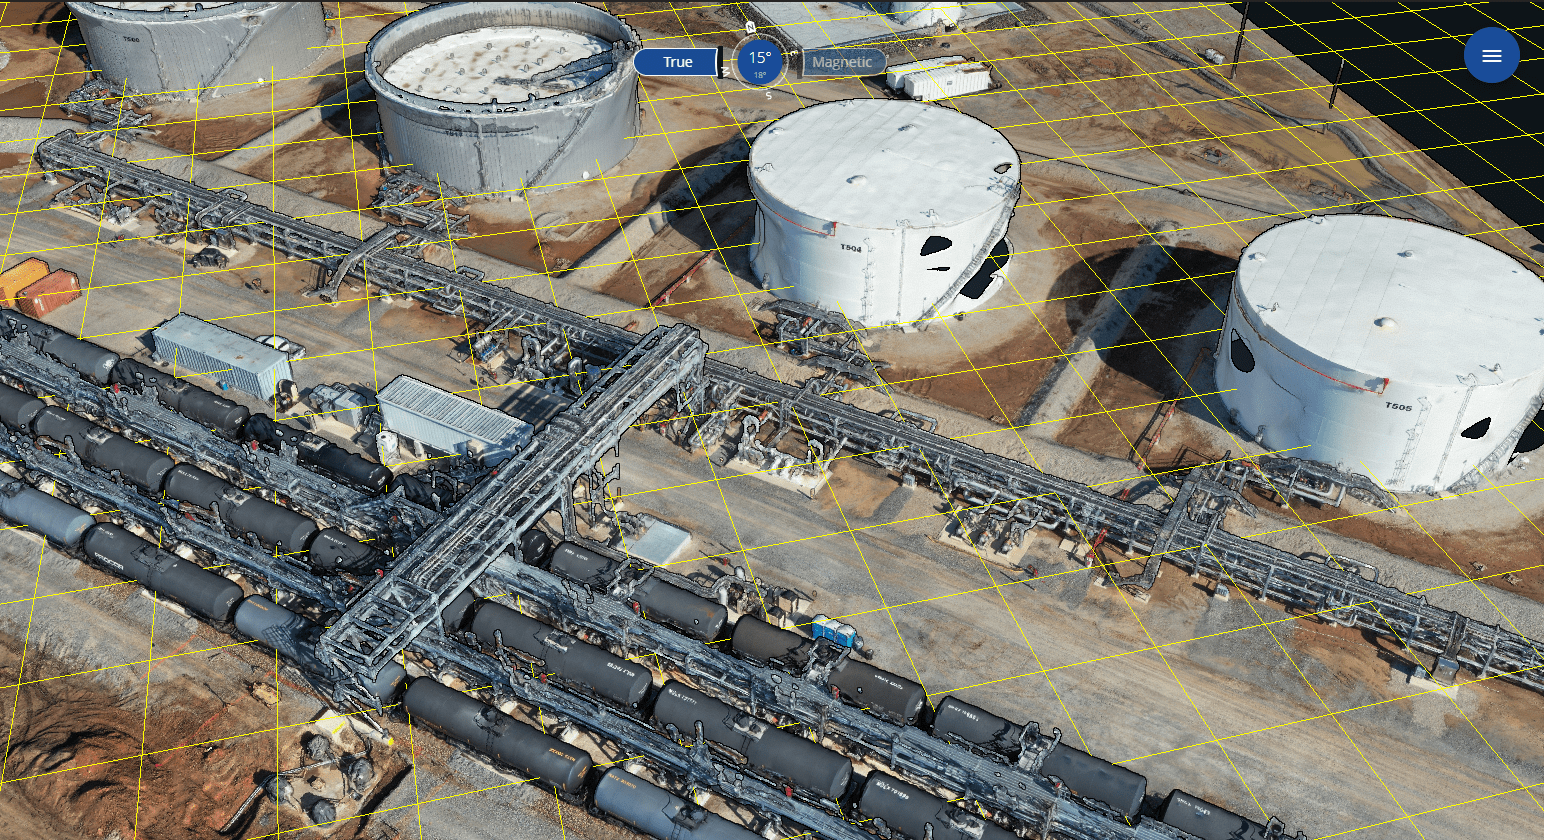 3D Digital Twin point cloud model of manufacturing site